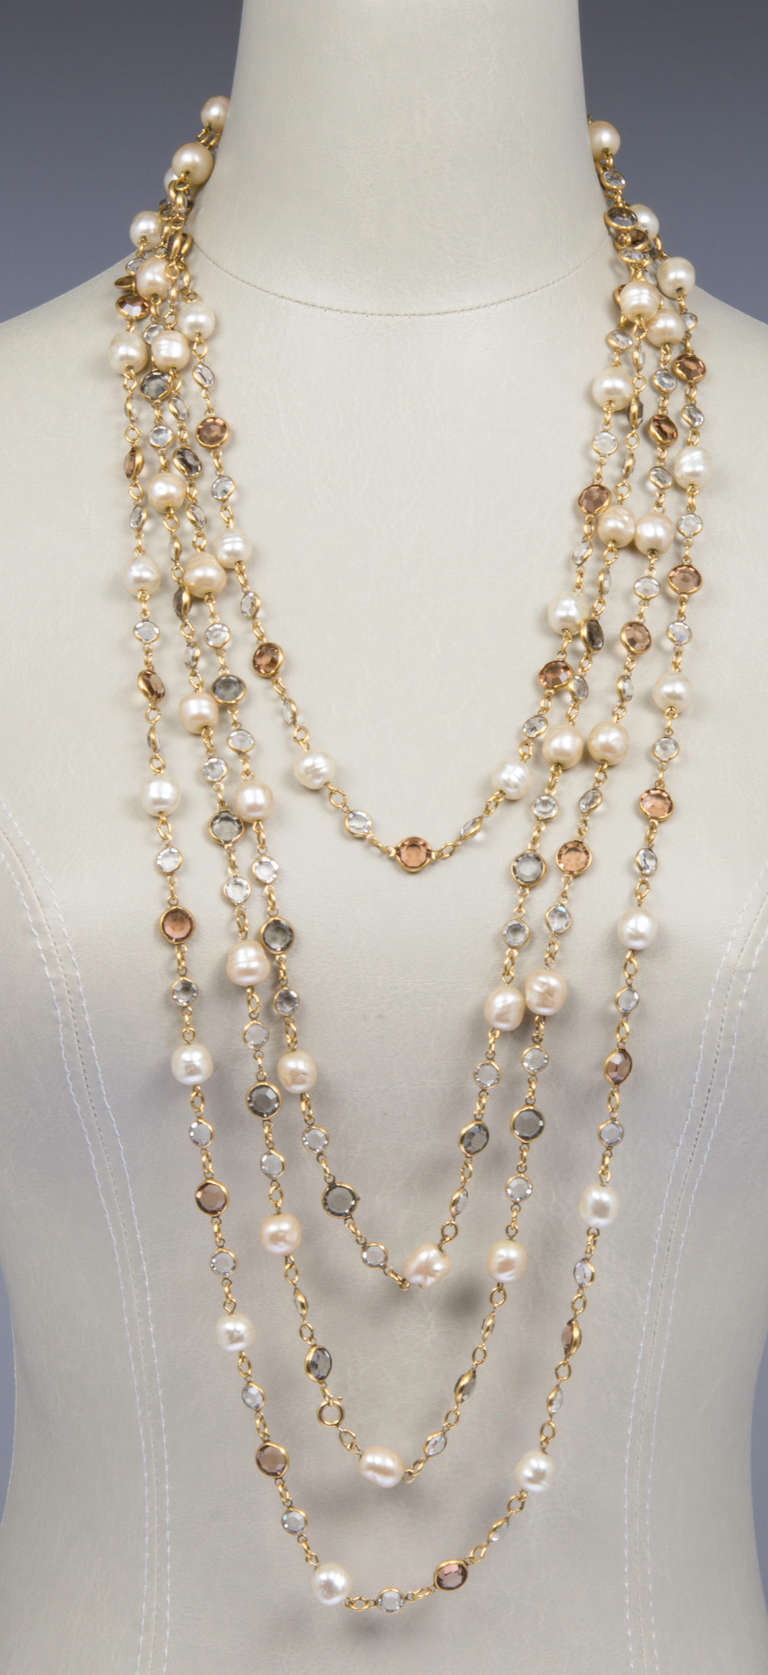 These are great looking necklaces! Light and airy they look very good worn singly and even better worn together!   One  necklace (grey rhinestones) is 69" long, as the other (clear rhinestones) is 64" long.